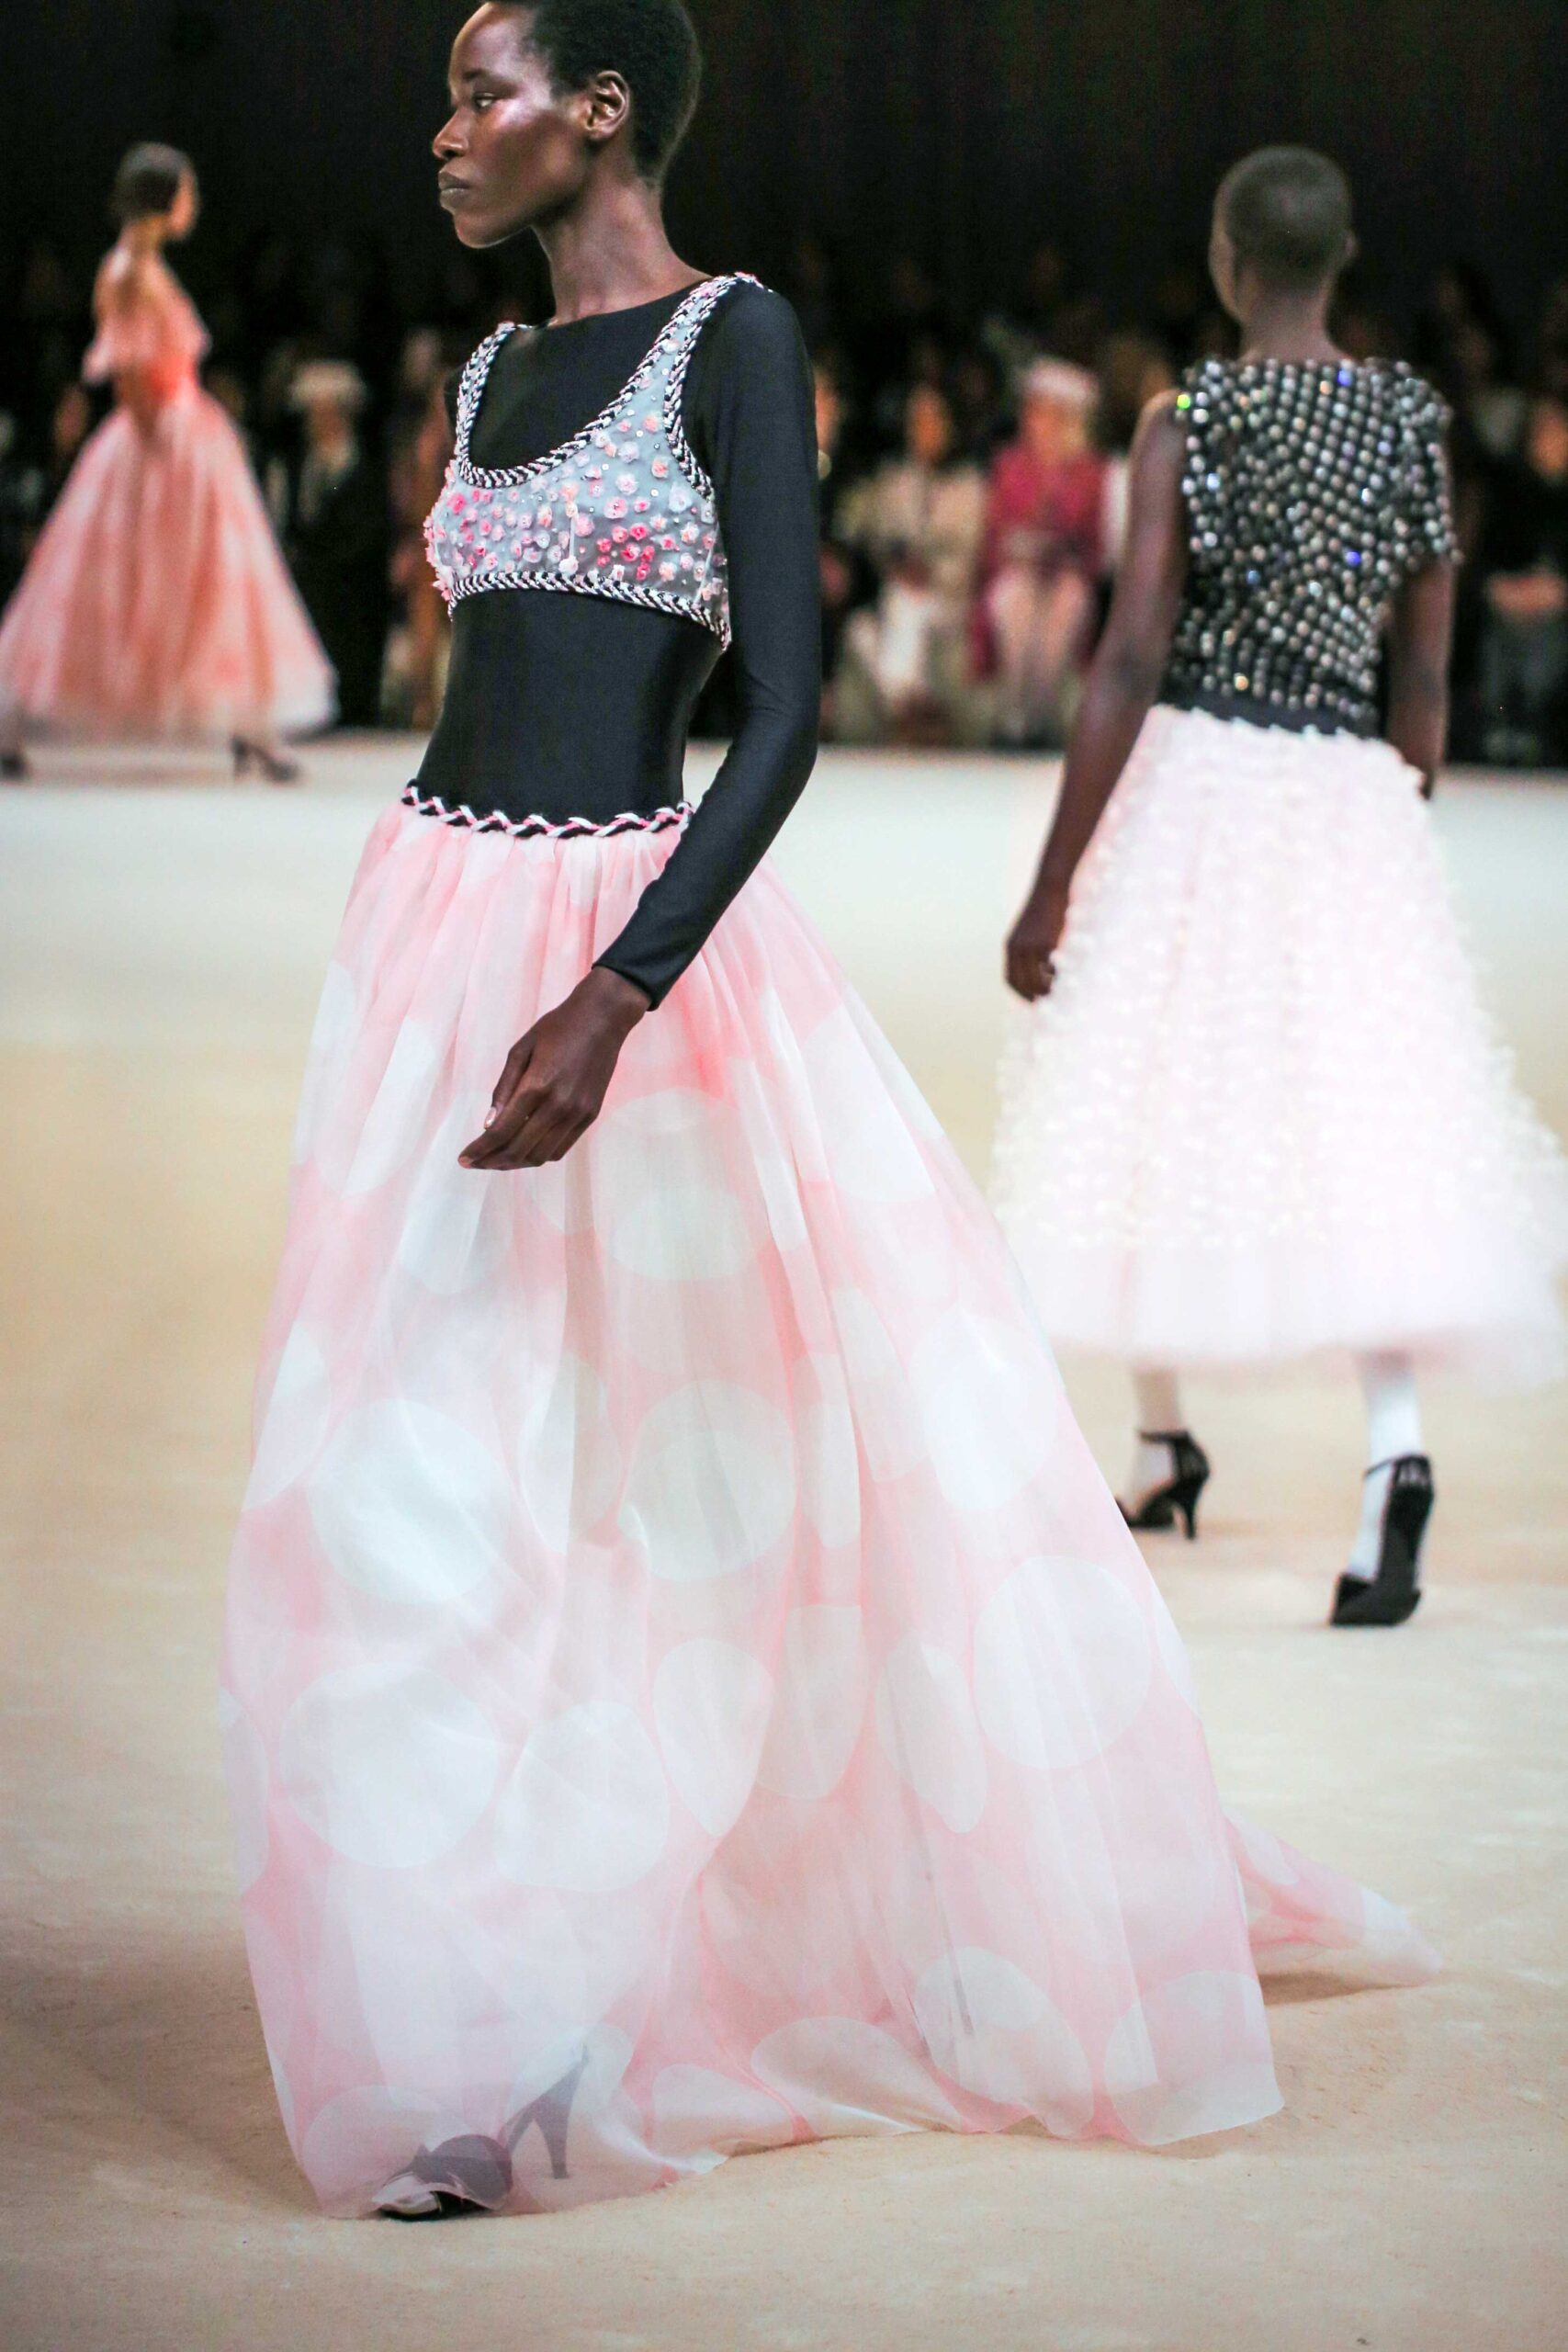 Get an Up-Close Look at CHANEL's Ballerina-Inspired Haute Couture